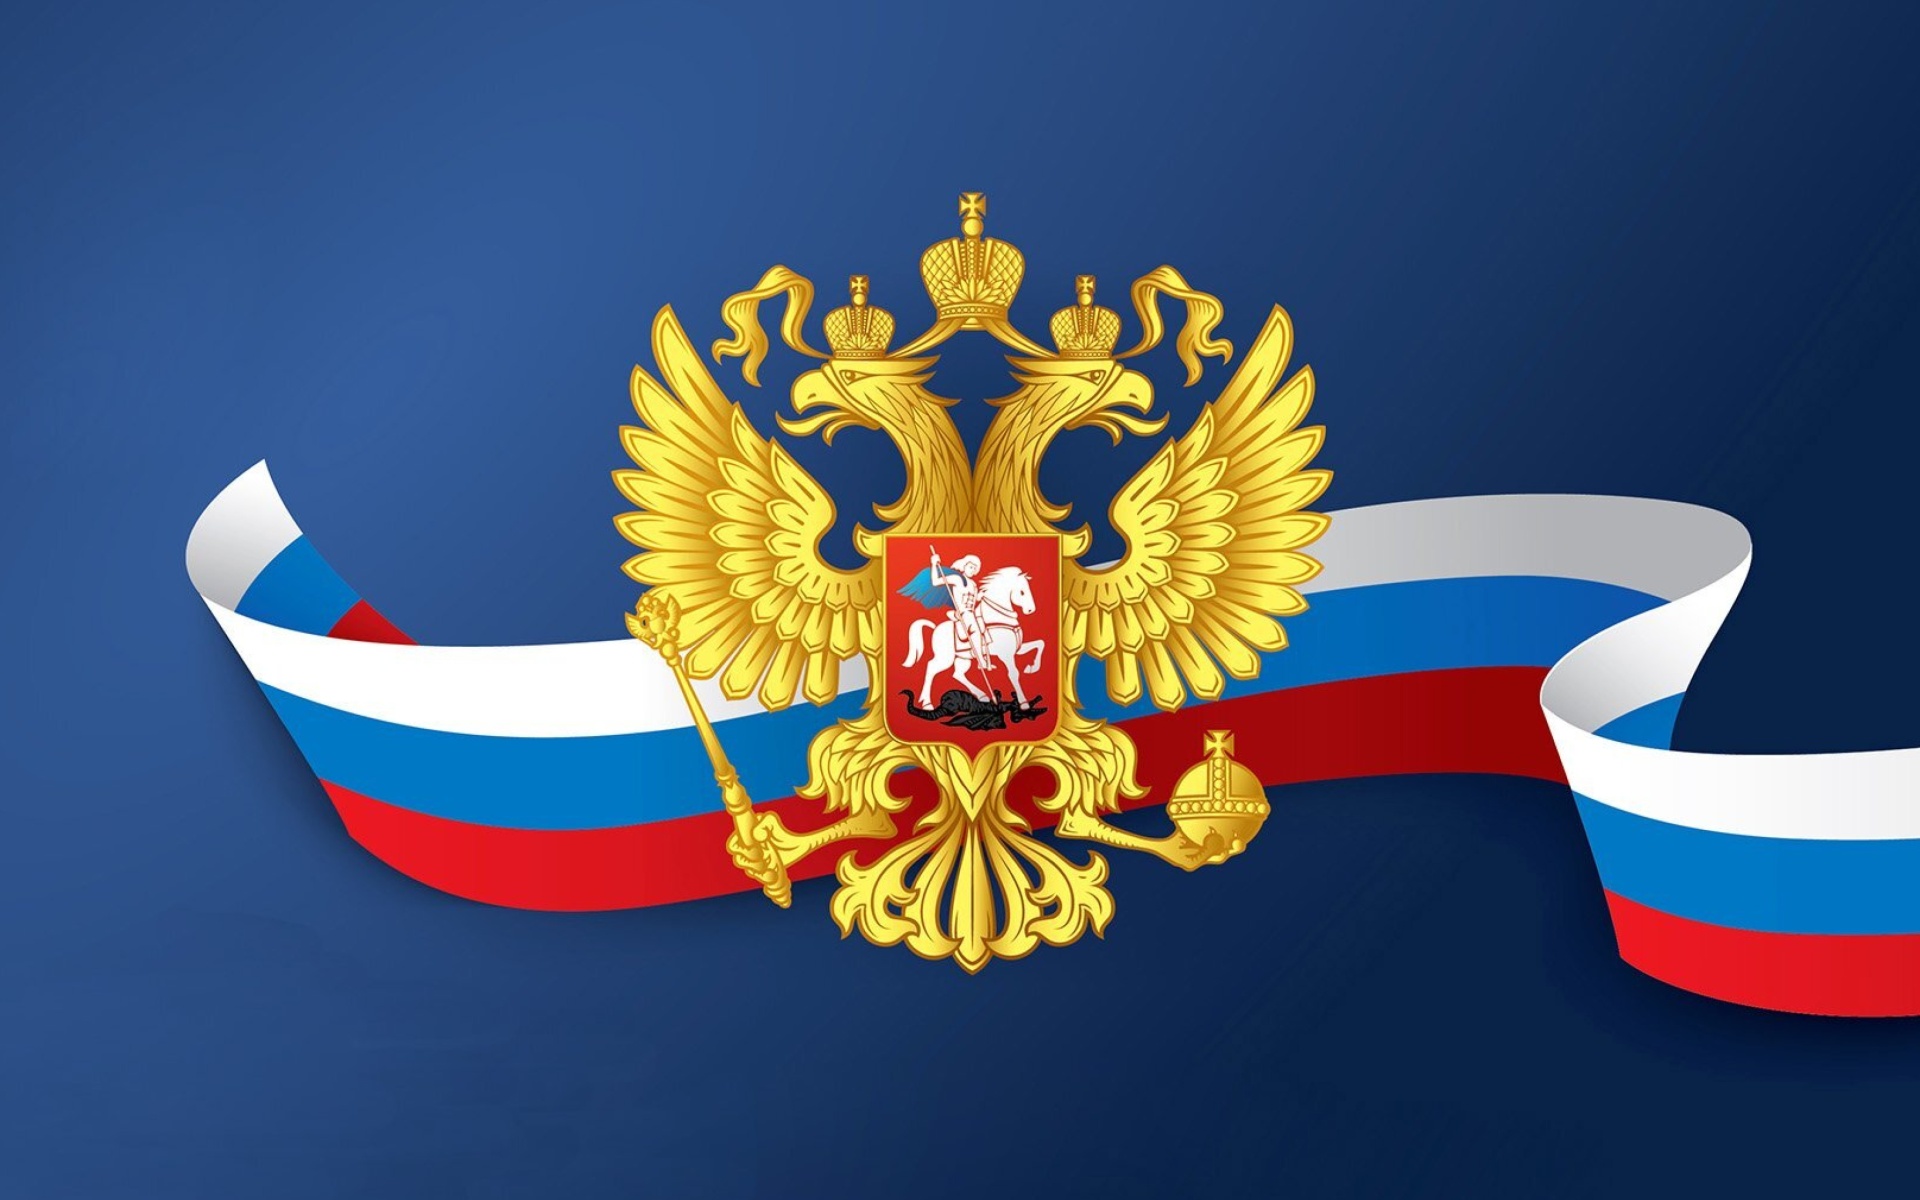 Russian coat of arms and flag wallpaper 1920x1200